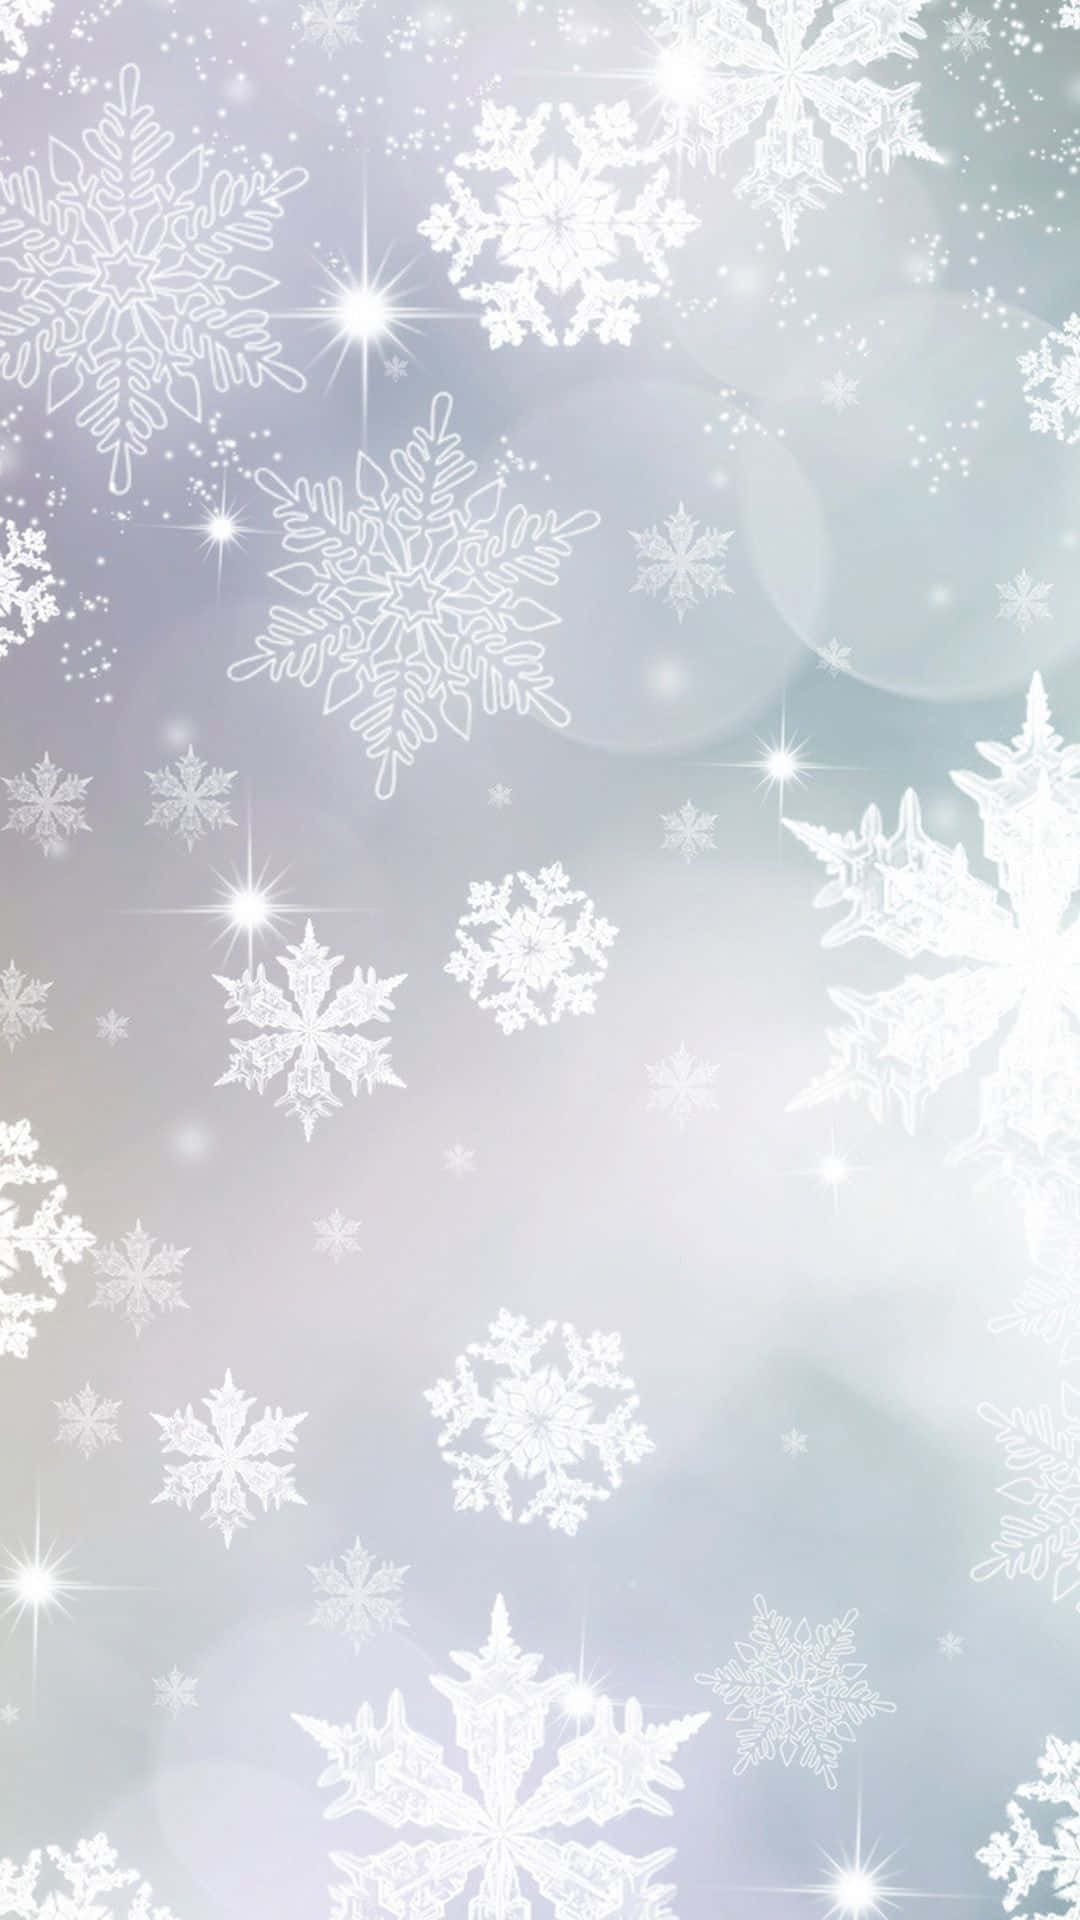 Take a journey to winter wonderland with this stunning white snow background